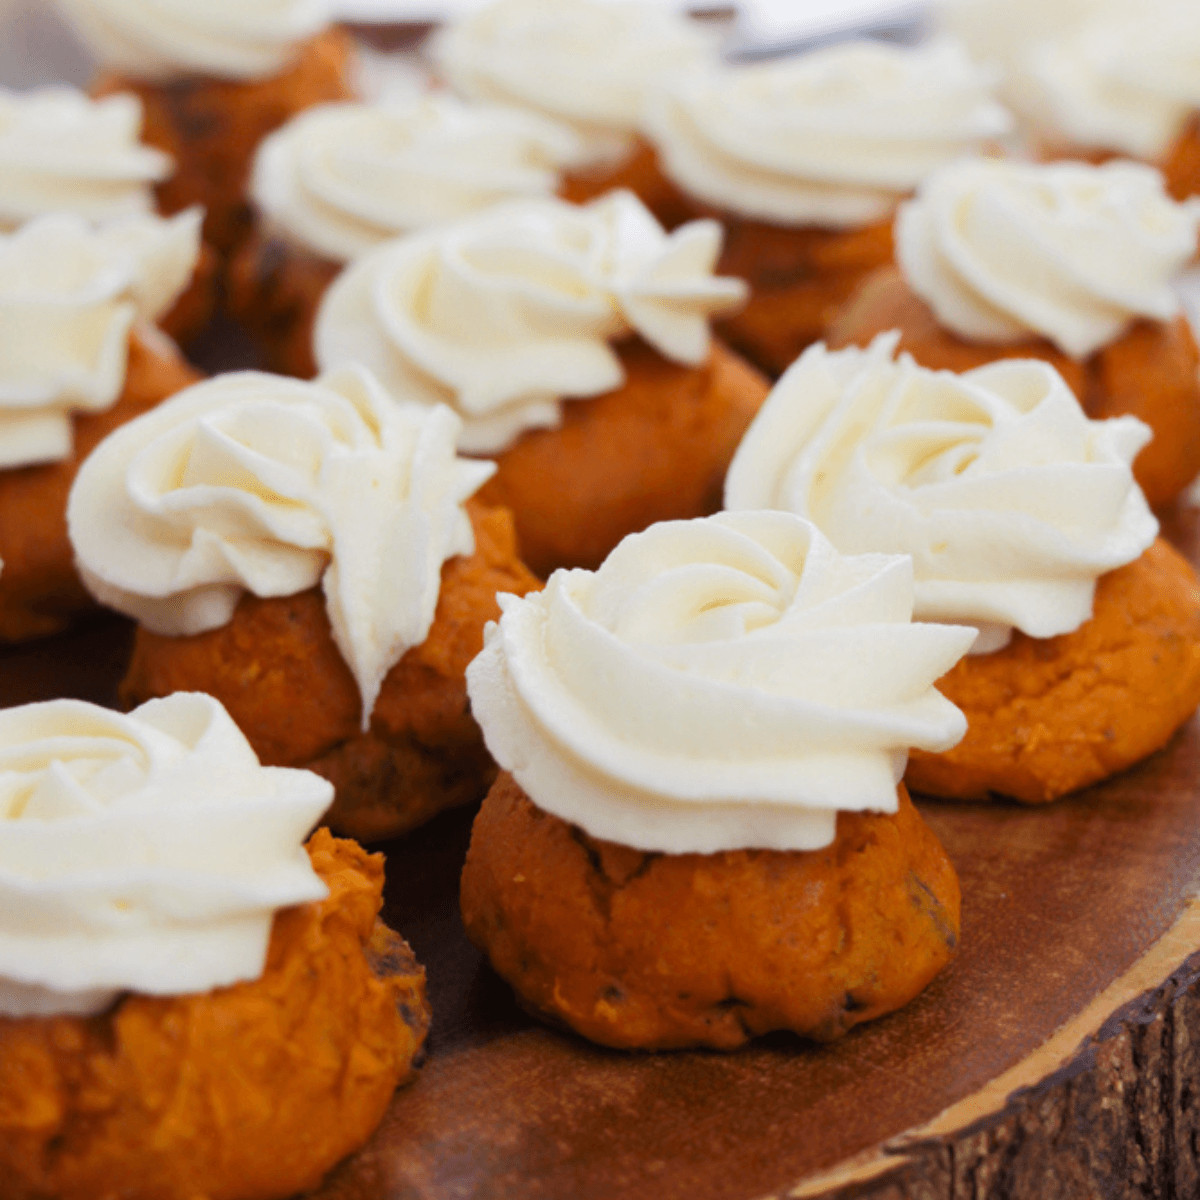 A side view of the pumpkin spice cookie with cream cheese frosting.